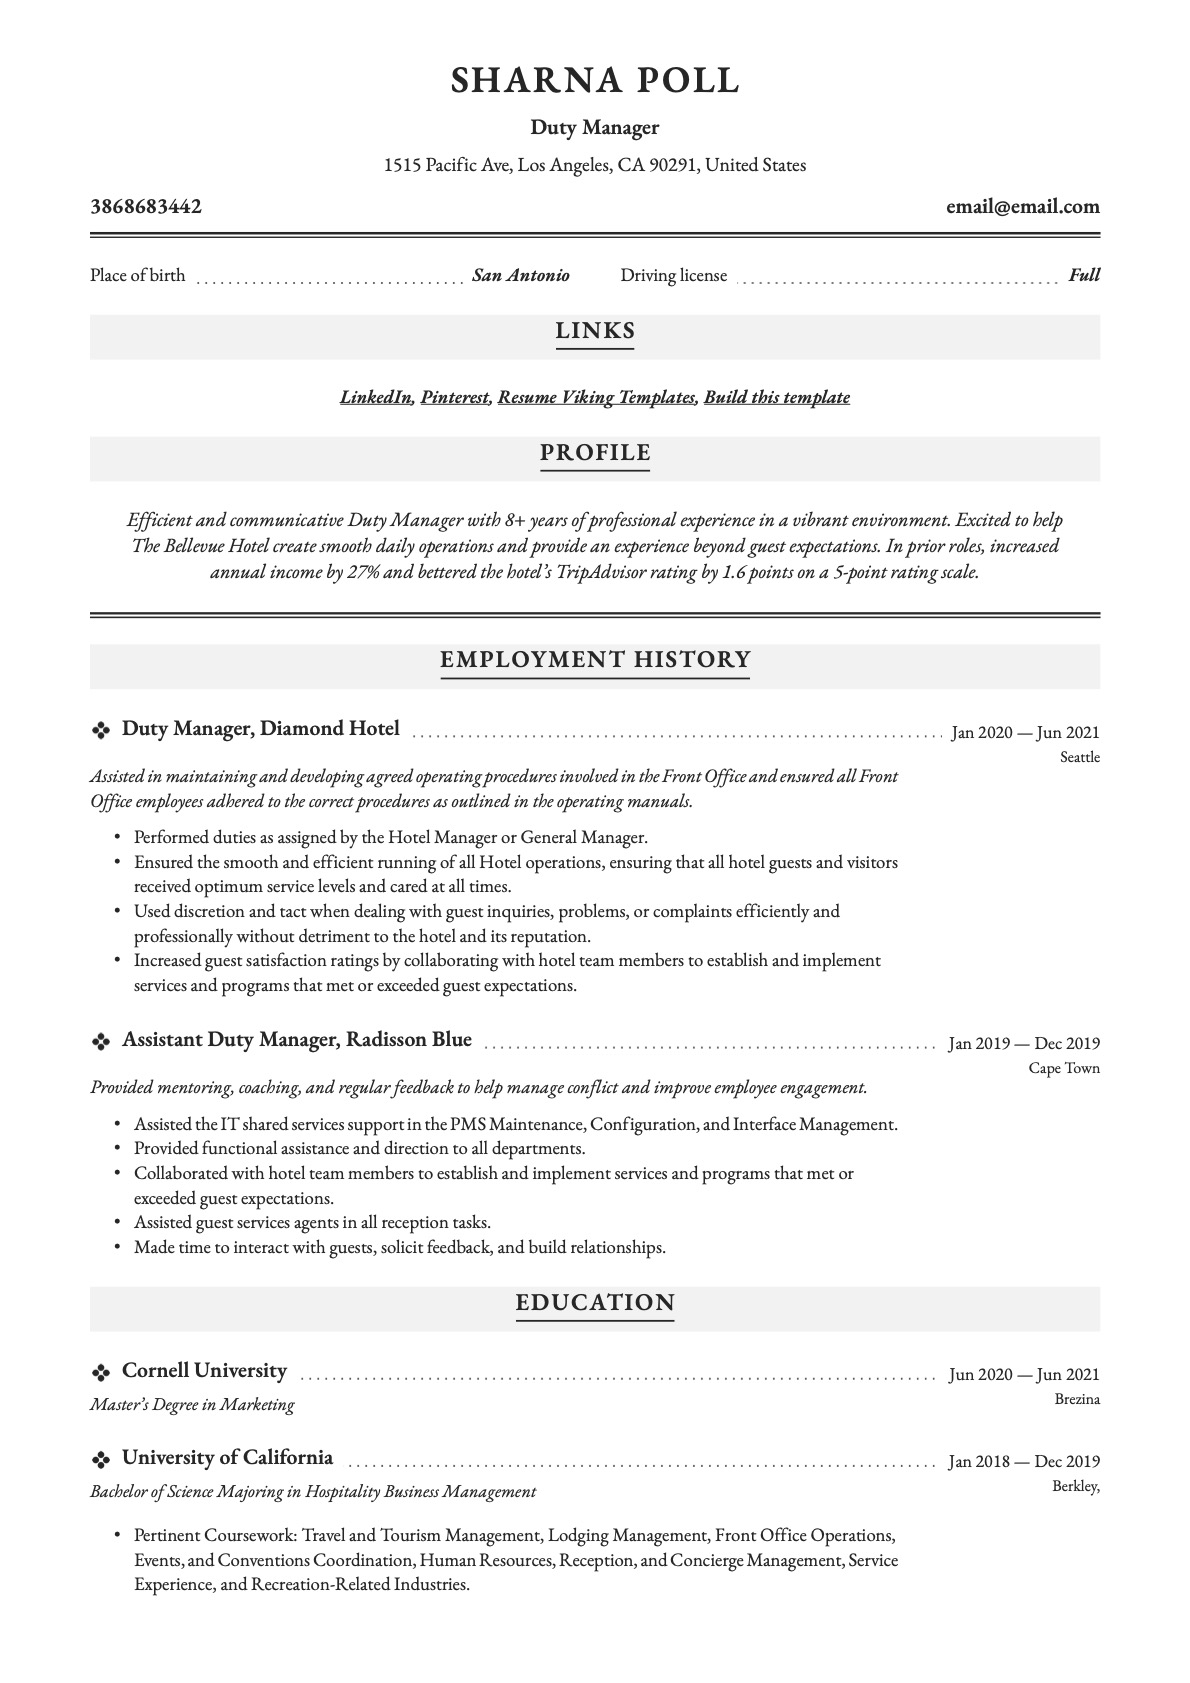 Duty Manager Resume